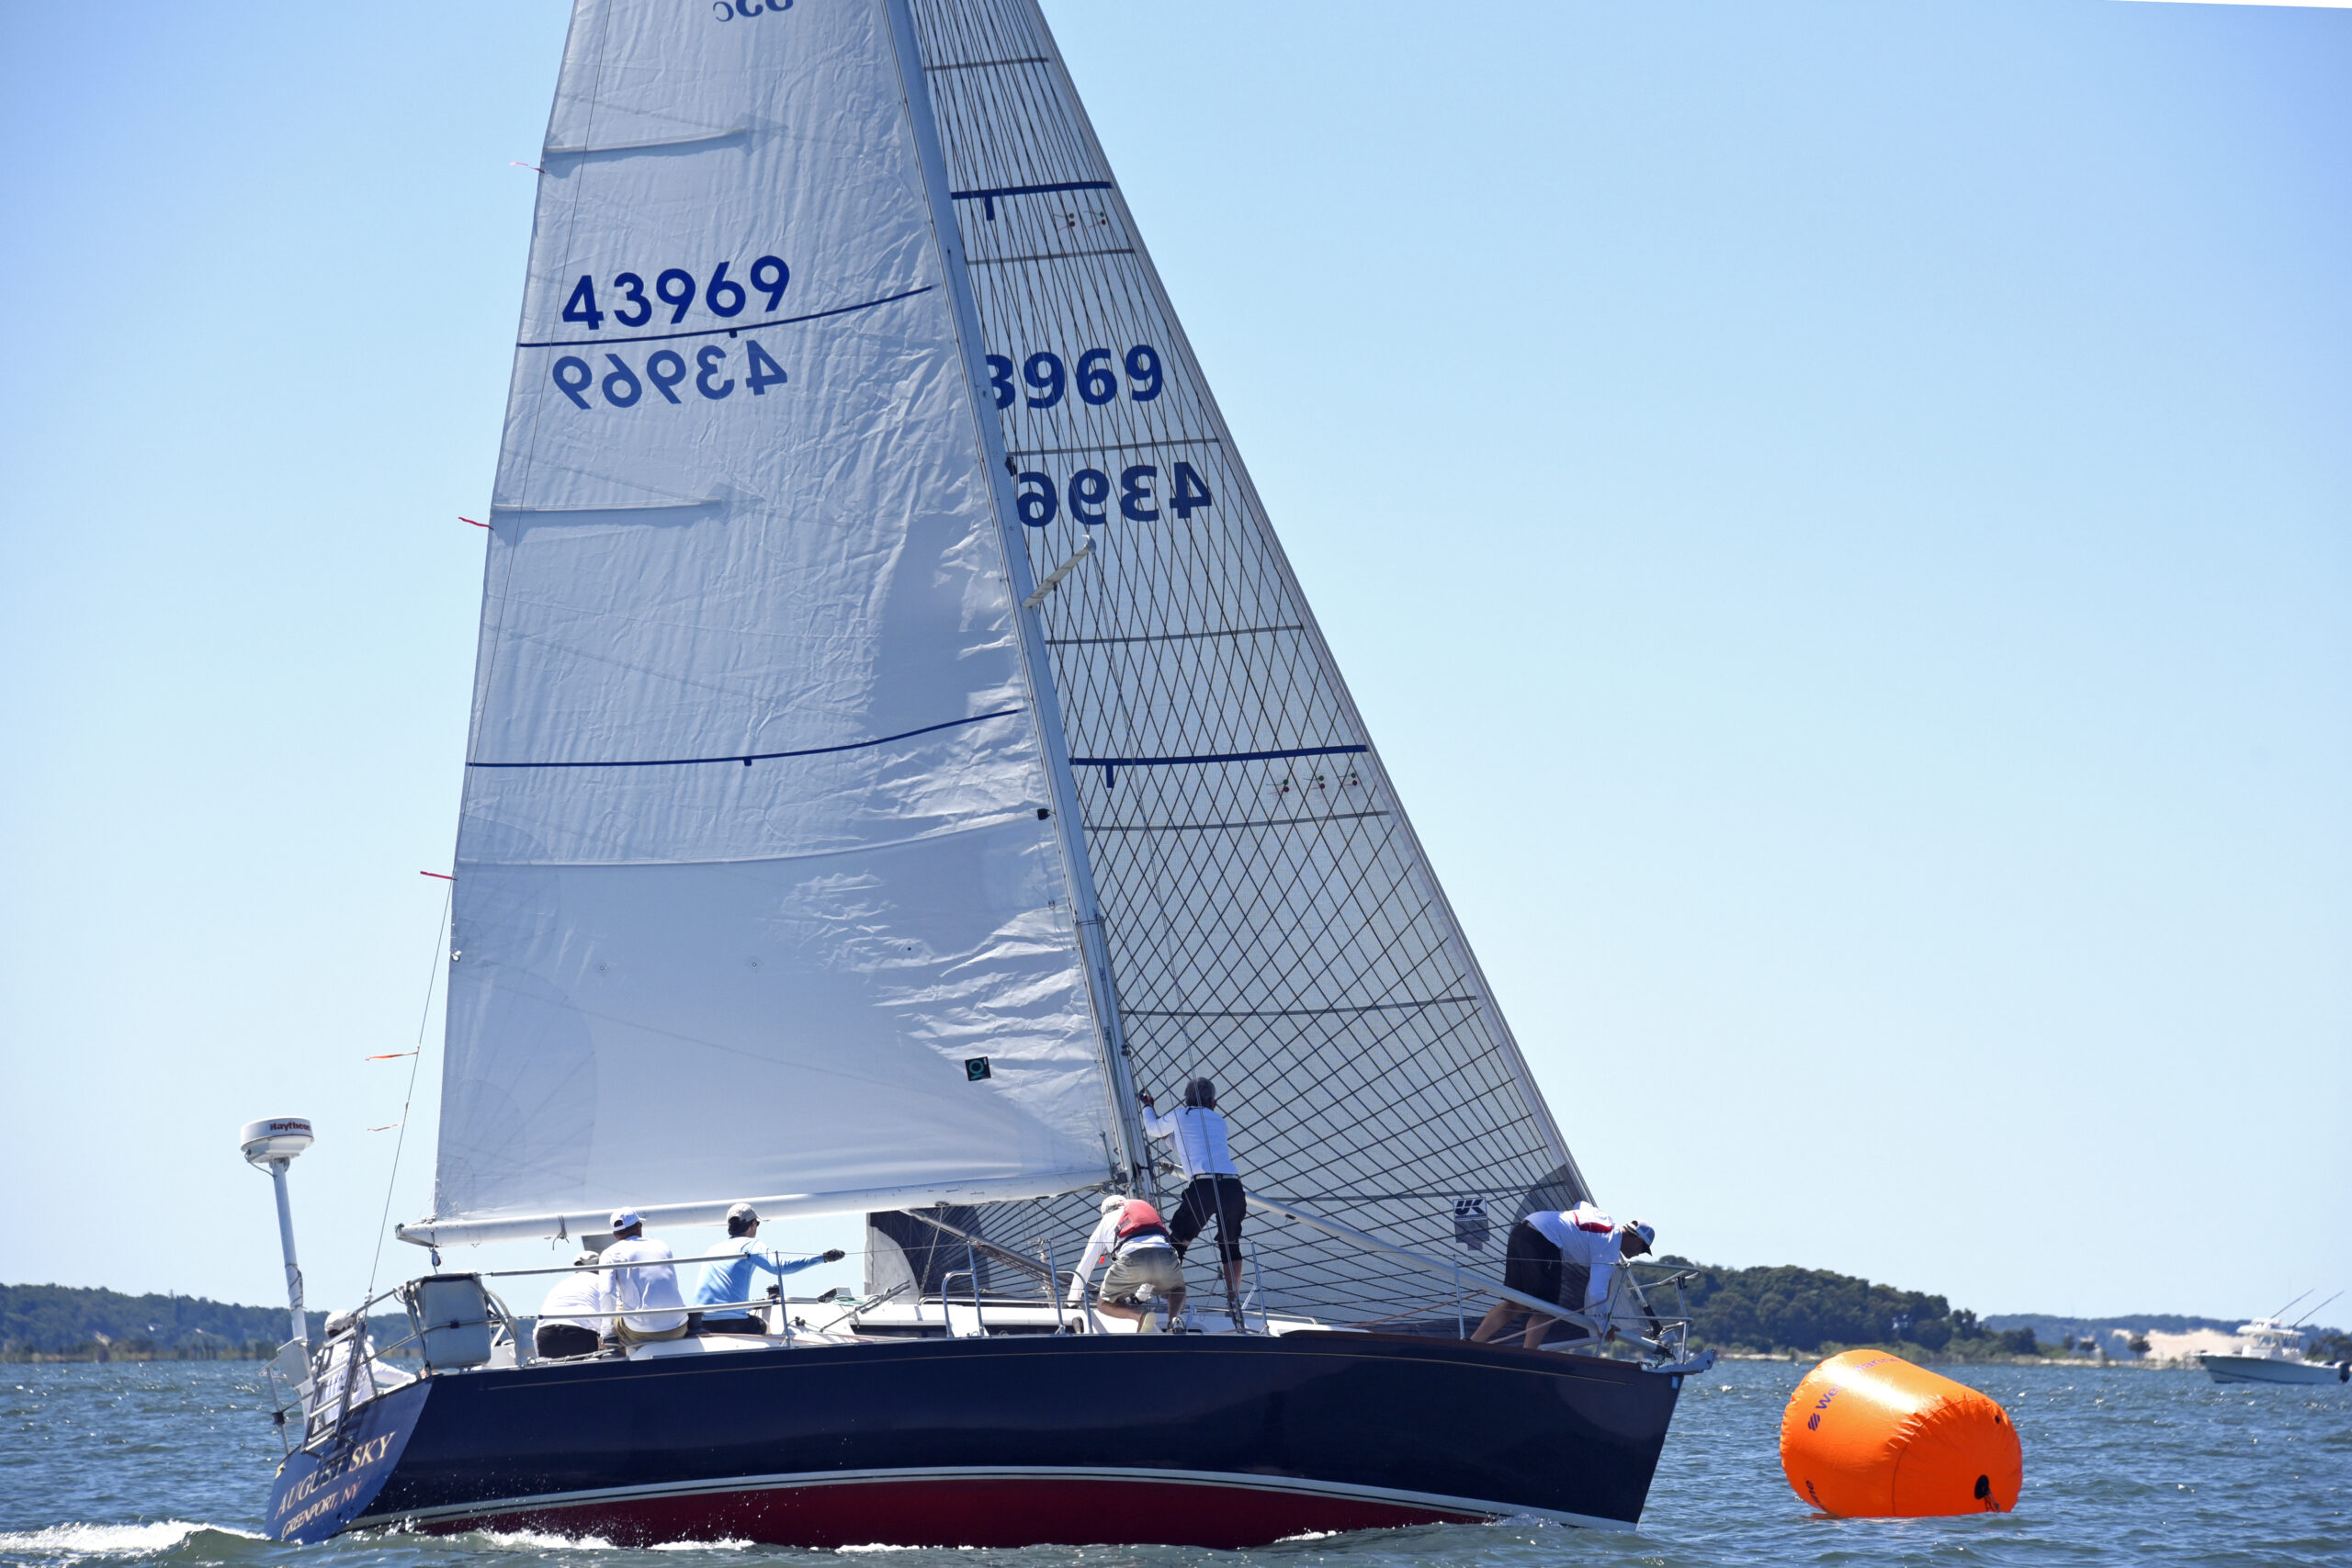 Non-spinnaker winner Philip Walters at the wheel of his J35 August Sky rounding the weather mark.    MICHAEL MELLA